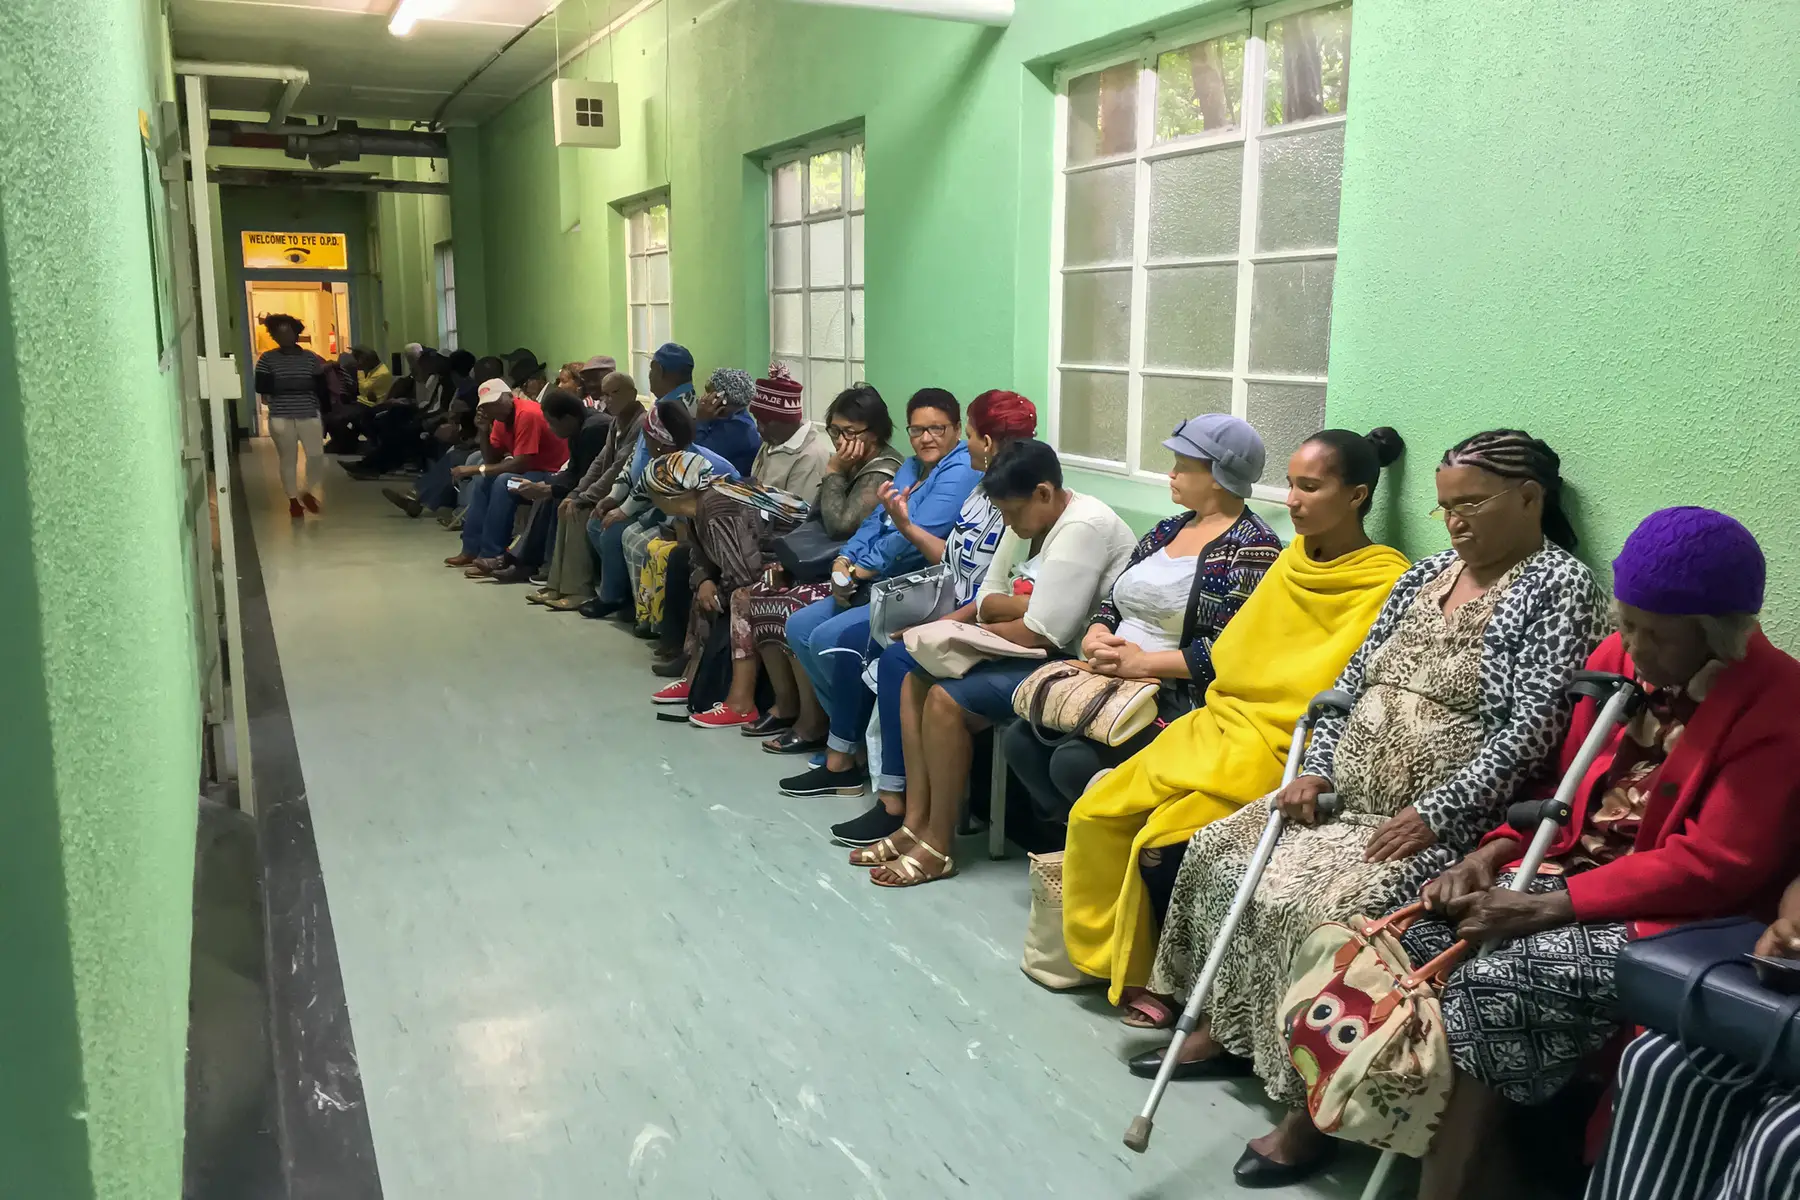 Public health system, long waiting times for patients - in a waiting hall